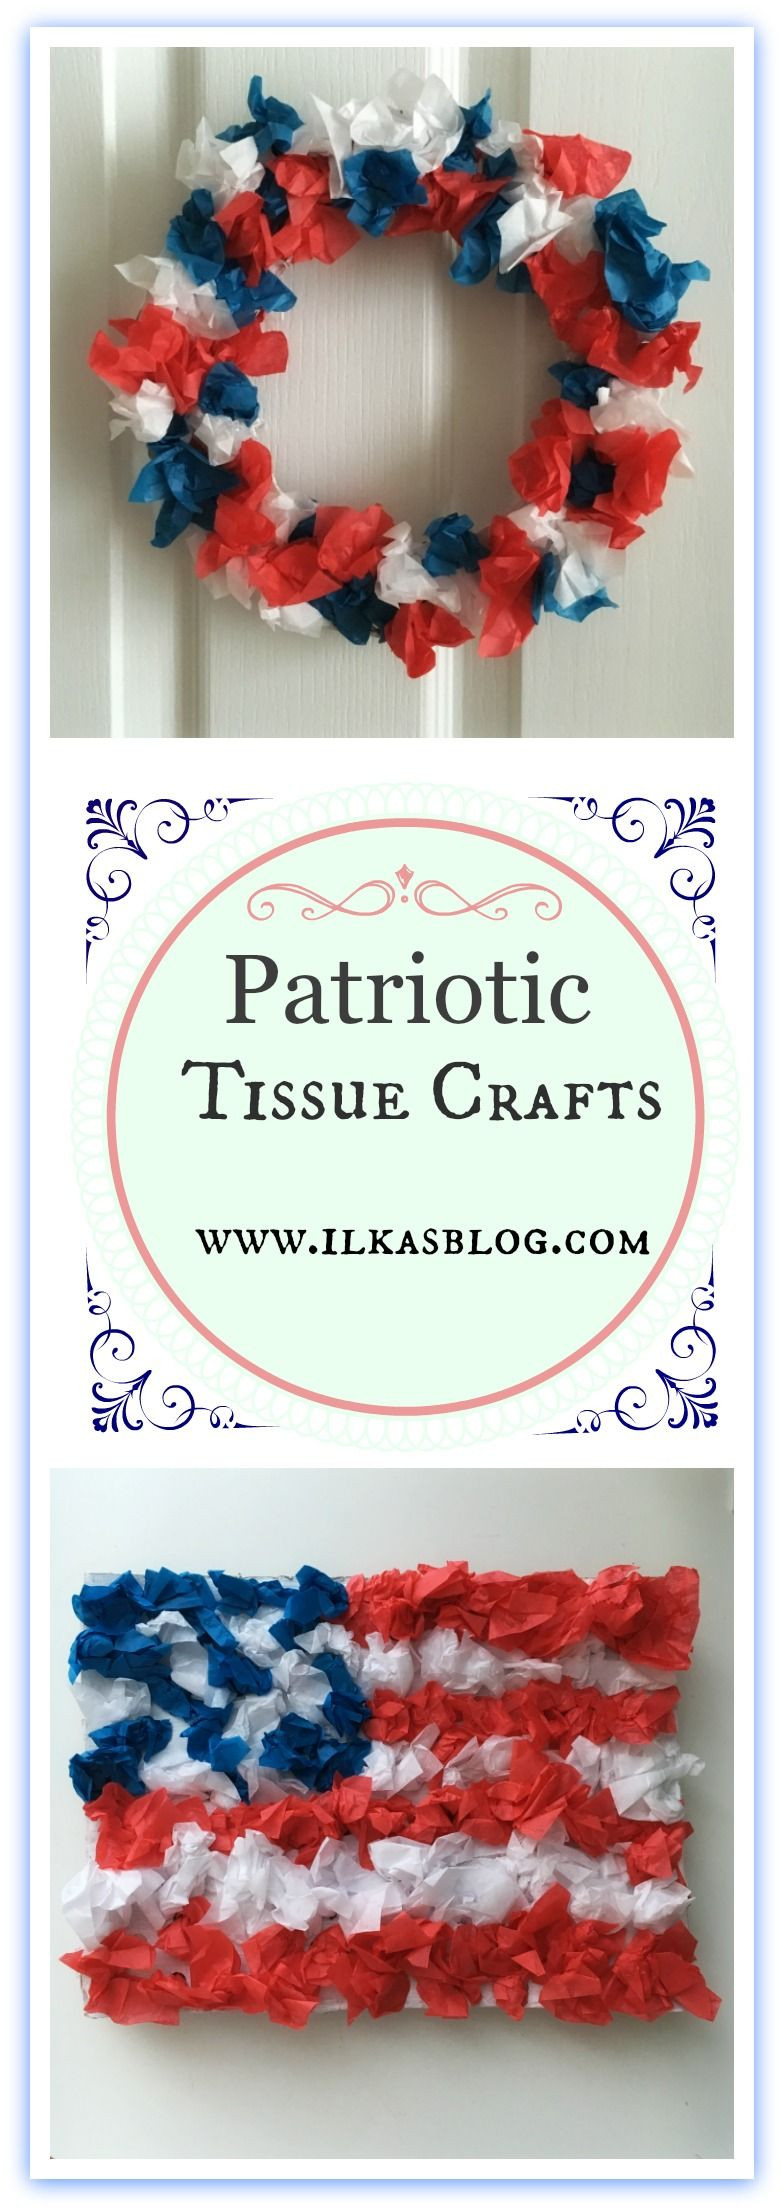 Labor Day Crafts For Toddlers
 Patriotic Tissue Crafts Kids